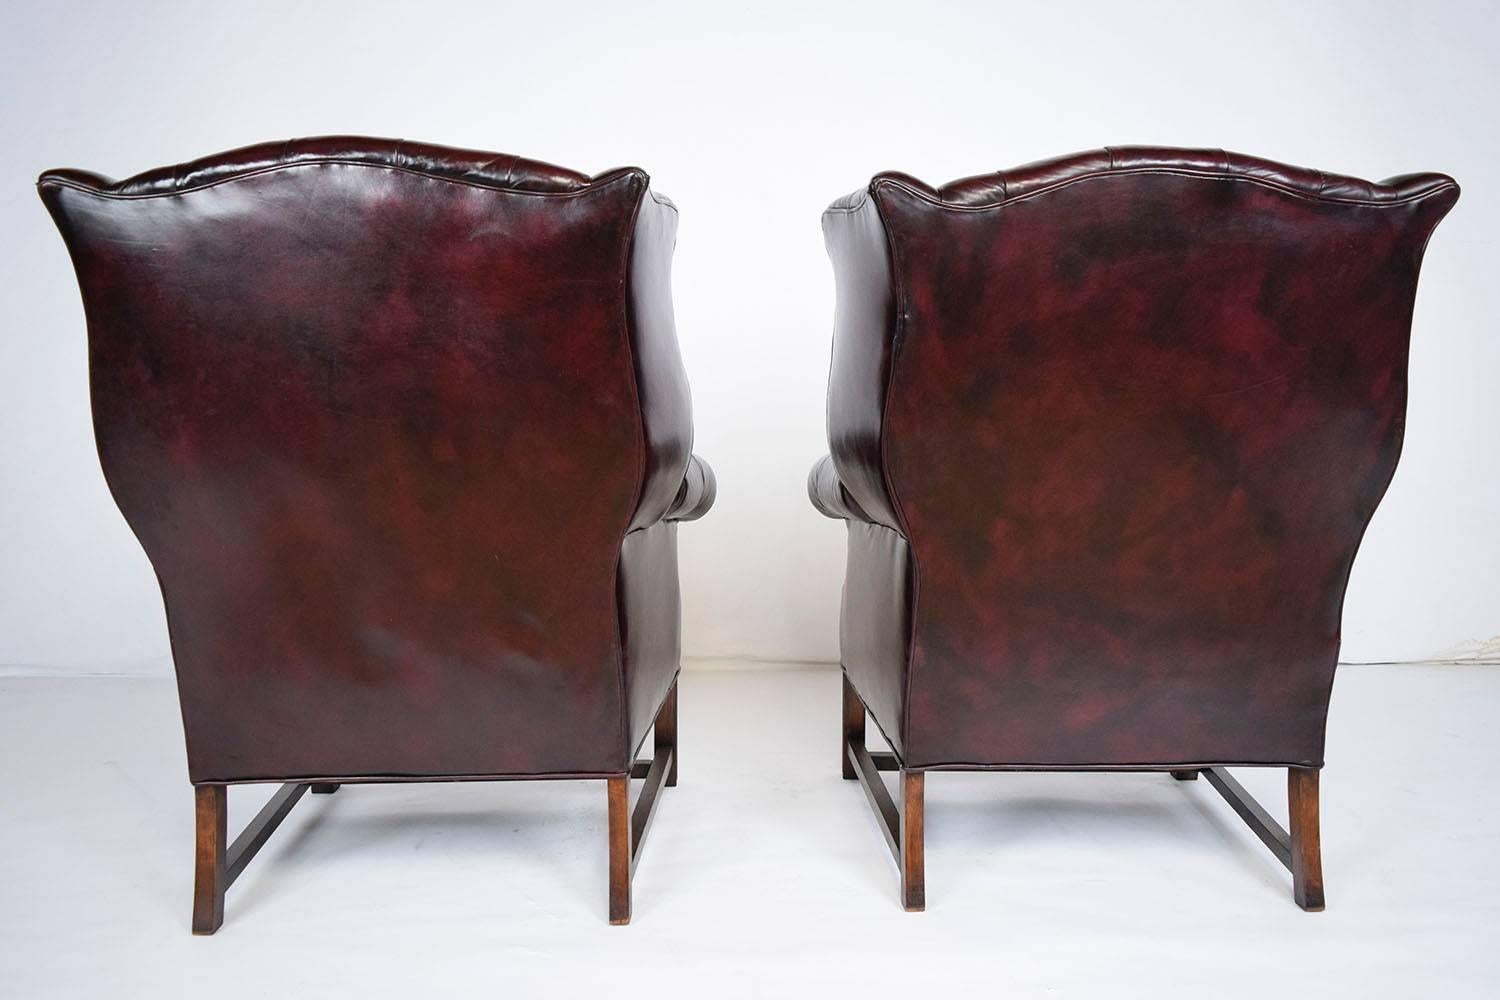 Dyed Pair of Chesterfield Tufted Leather Wingback Chairs